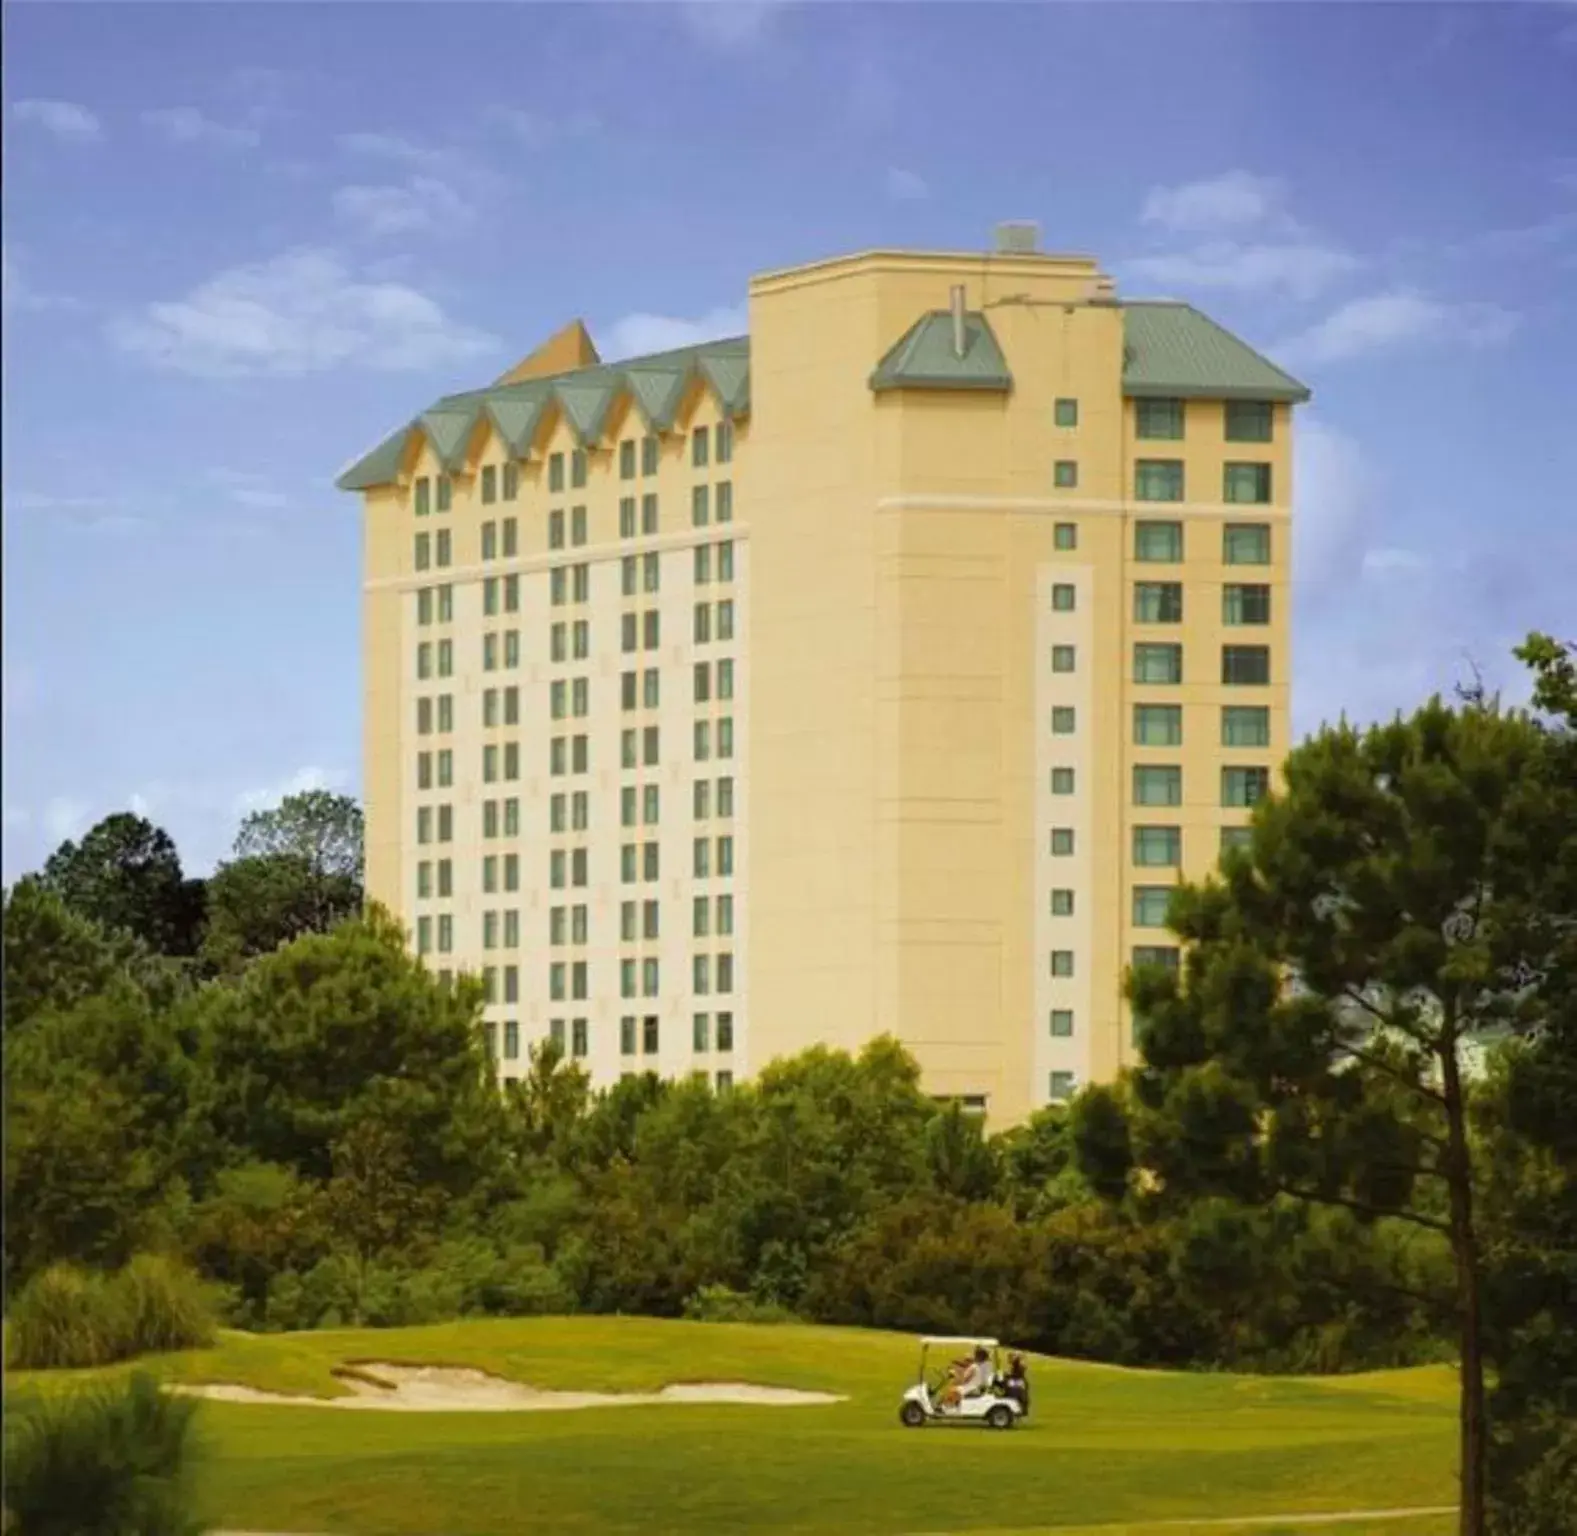 Golfcourse, Property Building in Hollywood Casino - Bay Saint Louis